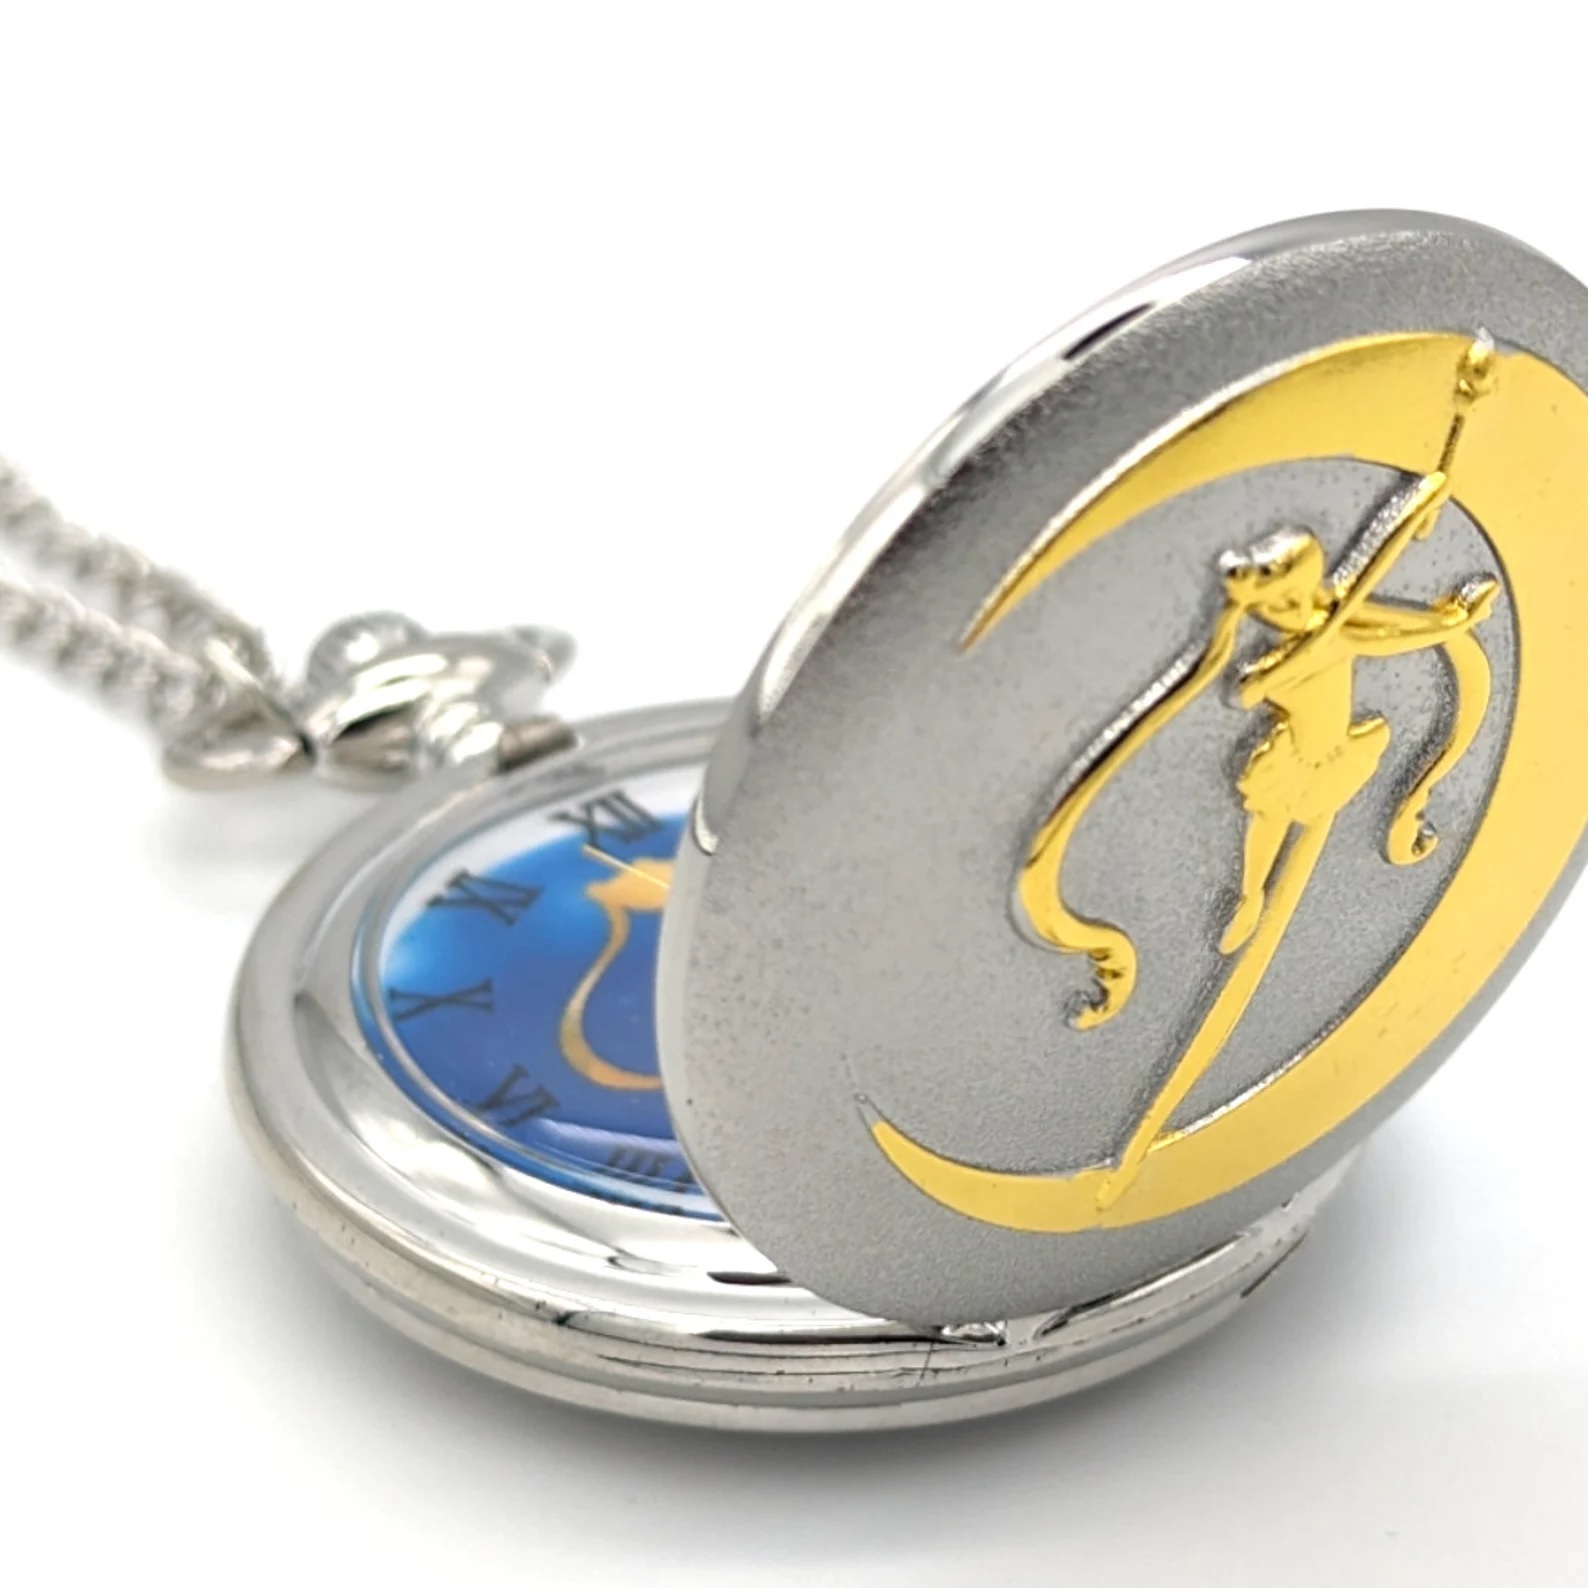 A silver pocket watch with a golden silhouette of Sailor Moon standing on a crescent moon on the outside. The watch face features the same pattern with the color blue in the background